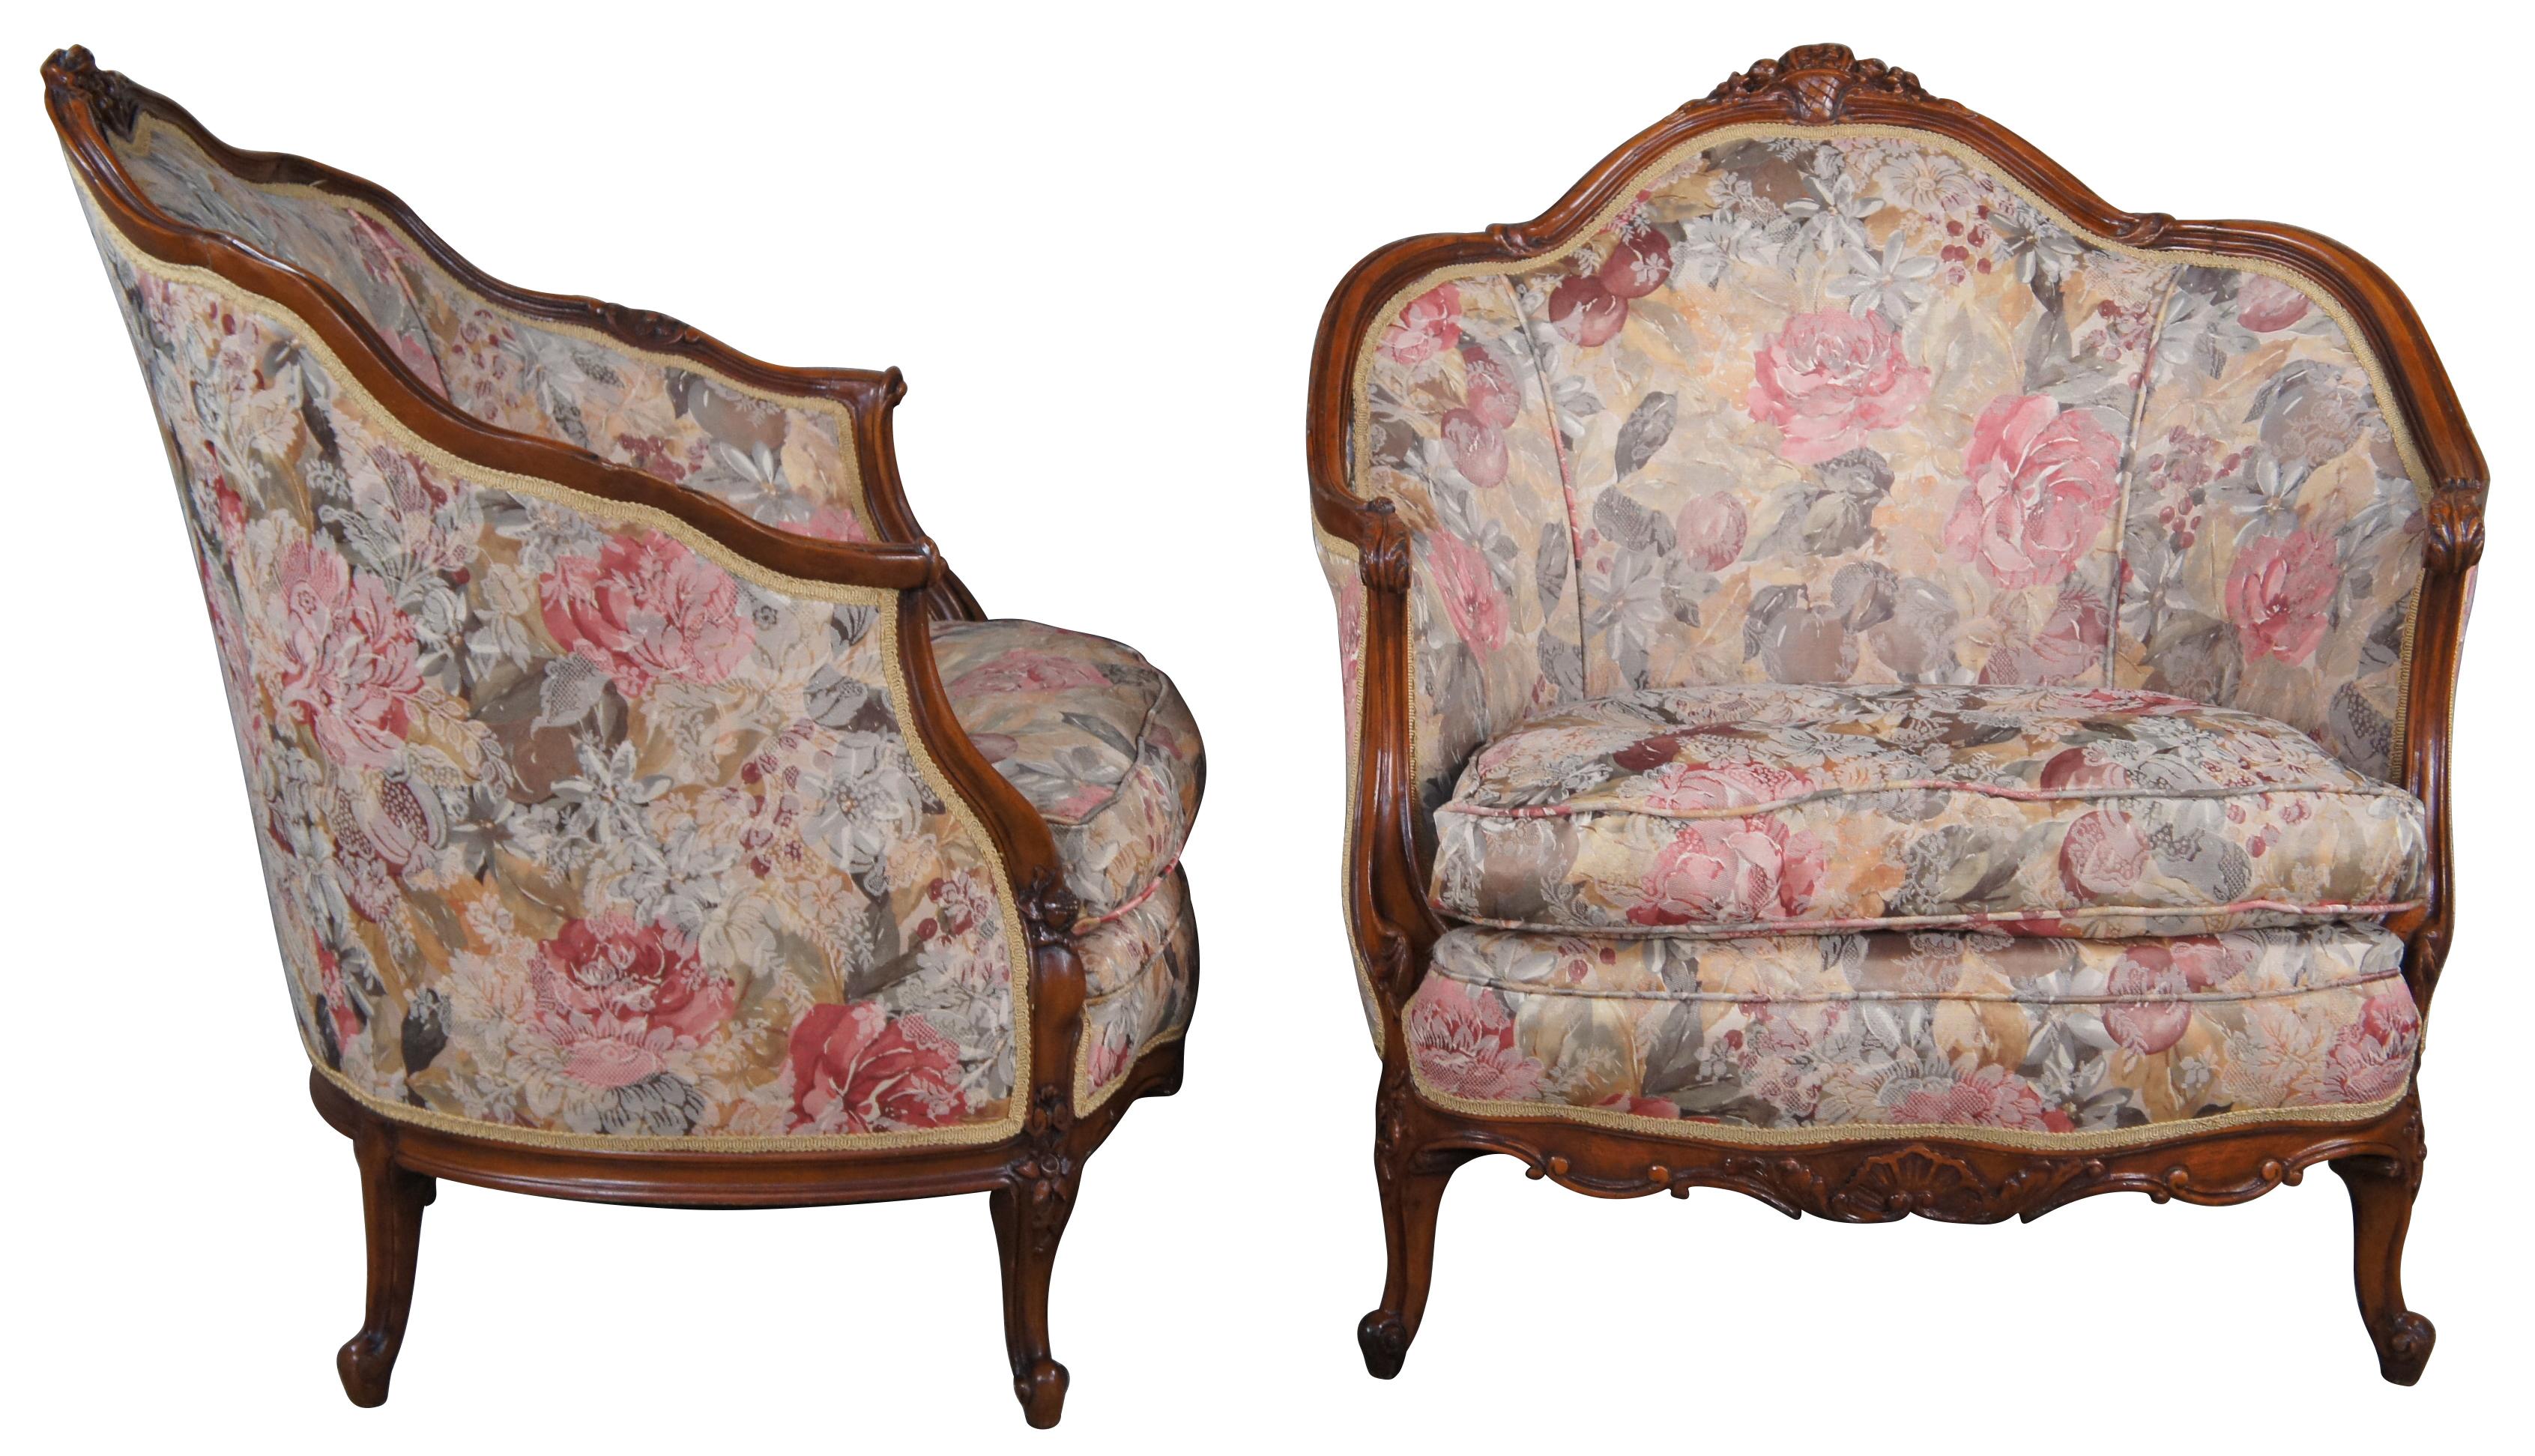 An incredible pair of antique French His & Hers bergere club arm chairs. Made from walnut with a scalloped barrel back design, carved with medallions, foliate, shells, cornucopia and acanthus. Upholstered in a pastel like fabric with cording and